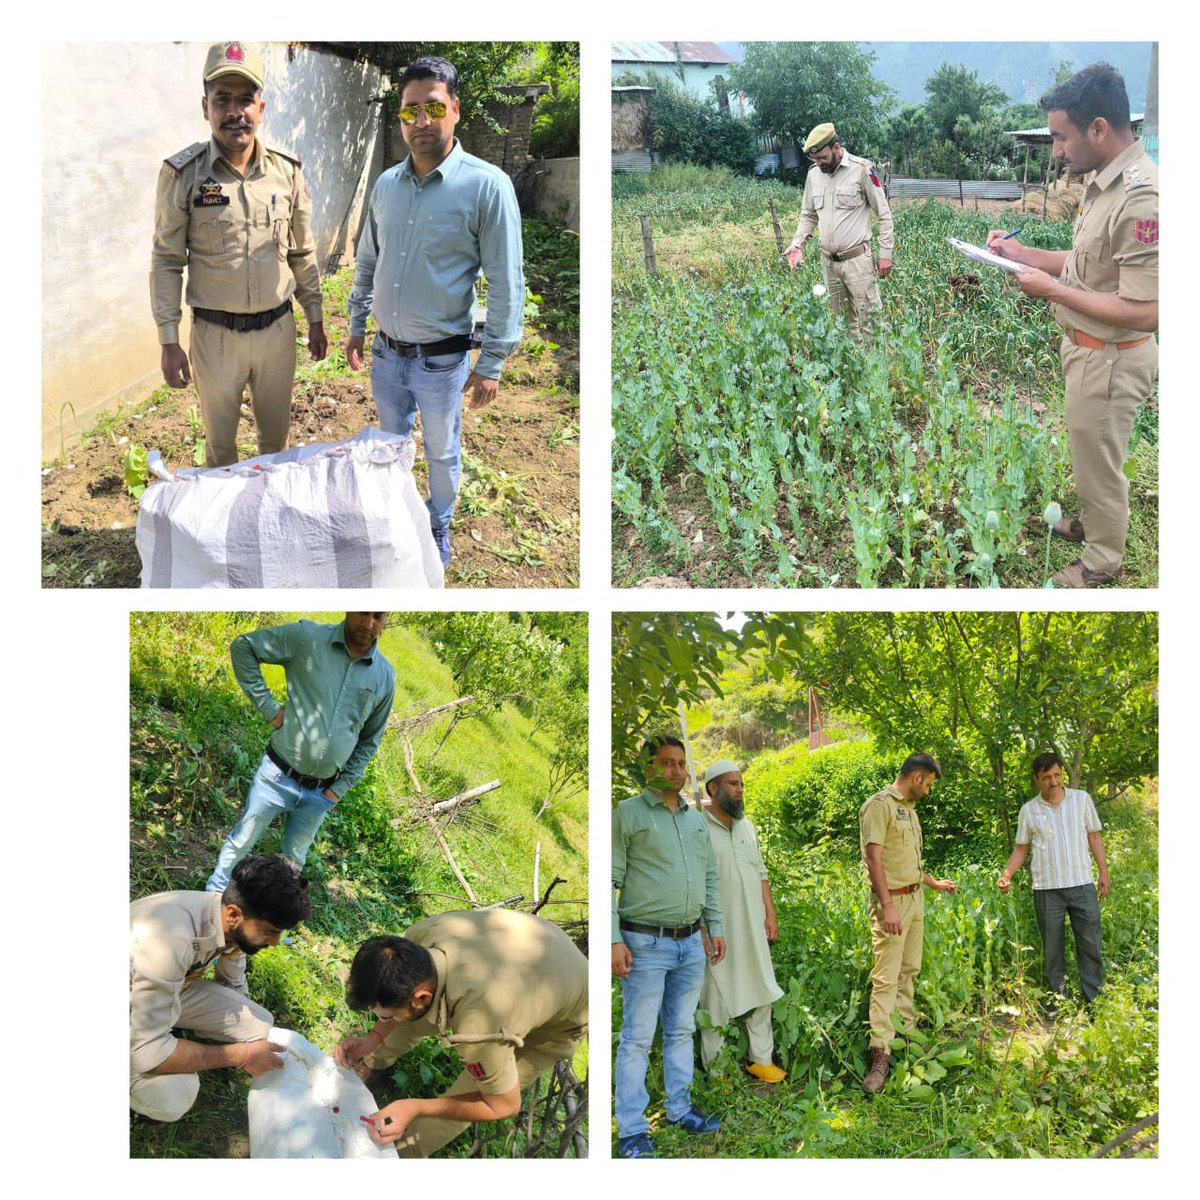 POPPY CULTIVATION DESTROYED,(3) FIRs REGISTERED FOR  ILLEGAL CULTIVATIONS  OF OPIUM  POPPY IN BHADERWAH DODA DISTRICT BY JAMMU AND KASHMIR POLICE @JmuKmrPolice @ZPHQJammu @adgp_igp